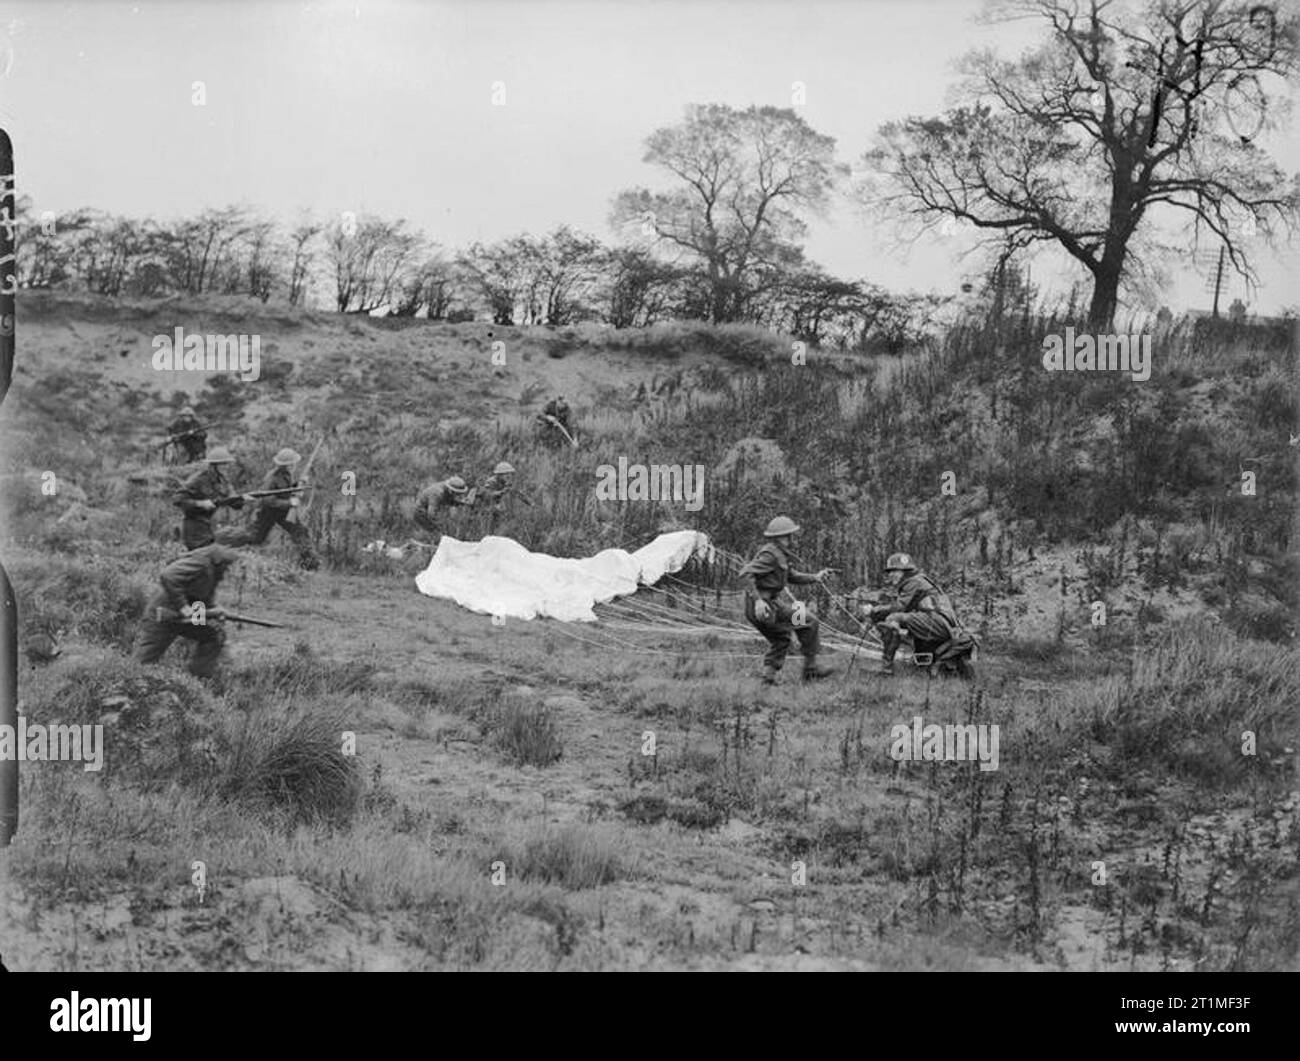 The Home Guard 1939-1945 The Home Guard: Men of the 5th Battalion (Doncaster) Home Guard rounding up an 'enemy' parachutist during training for assisting the Army in the event of an invasion. Stock Photo